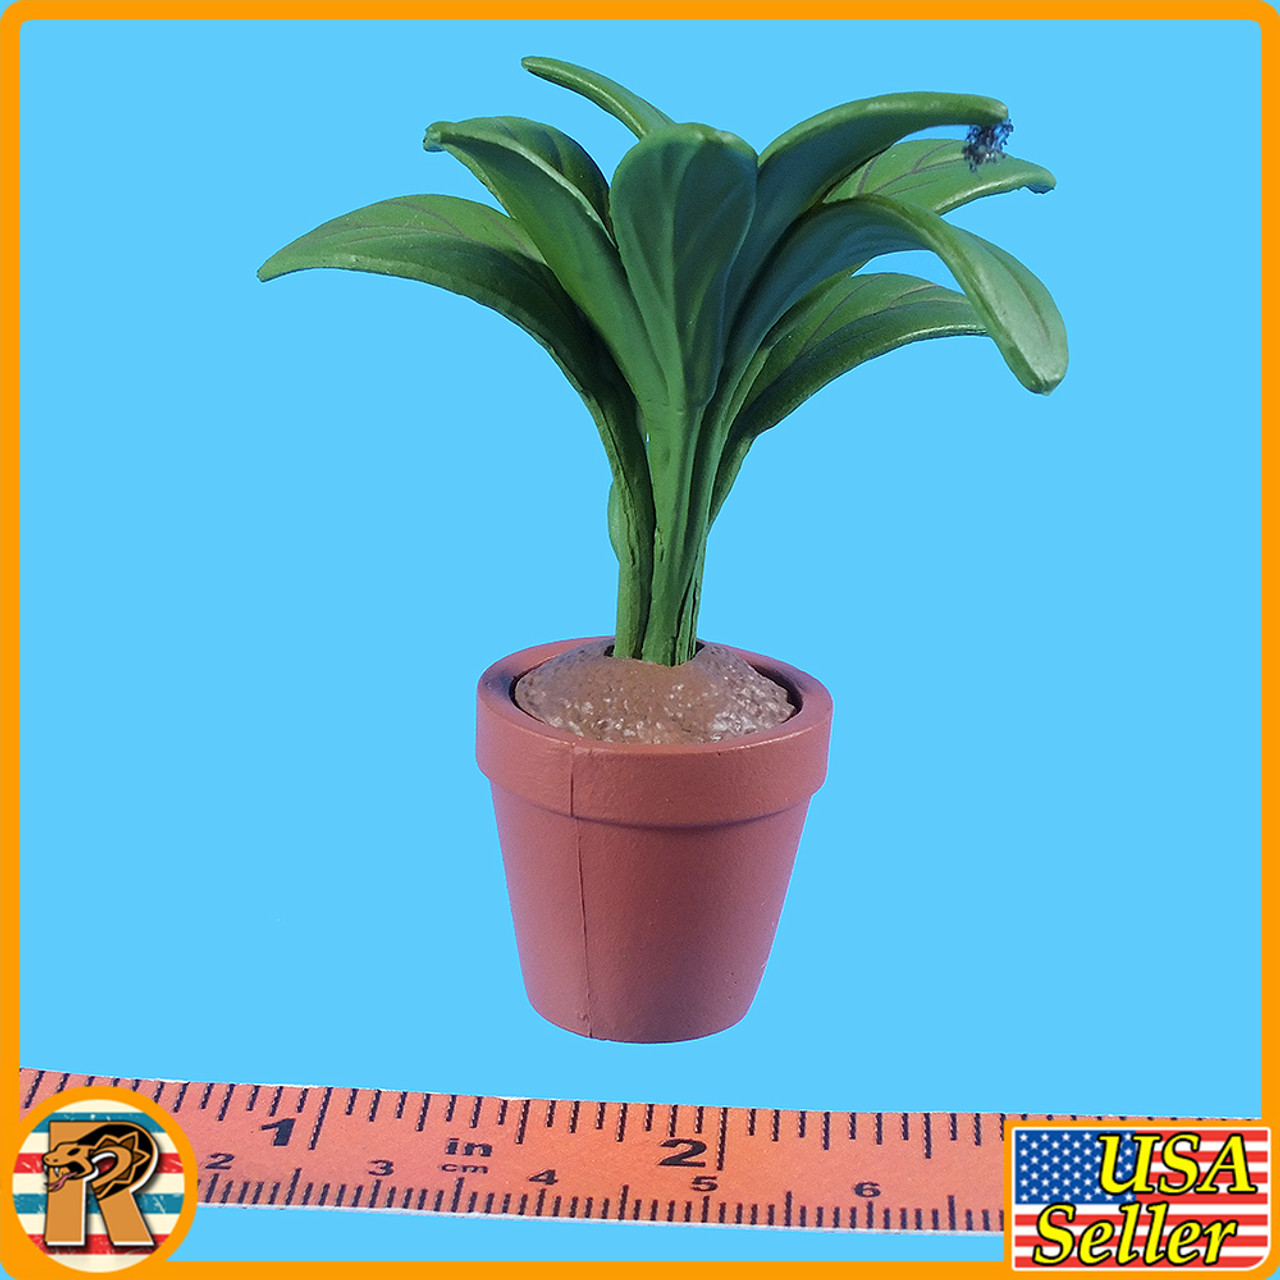 Professional Leon - Potted Plant - 1/6 Scale -